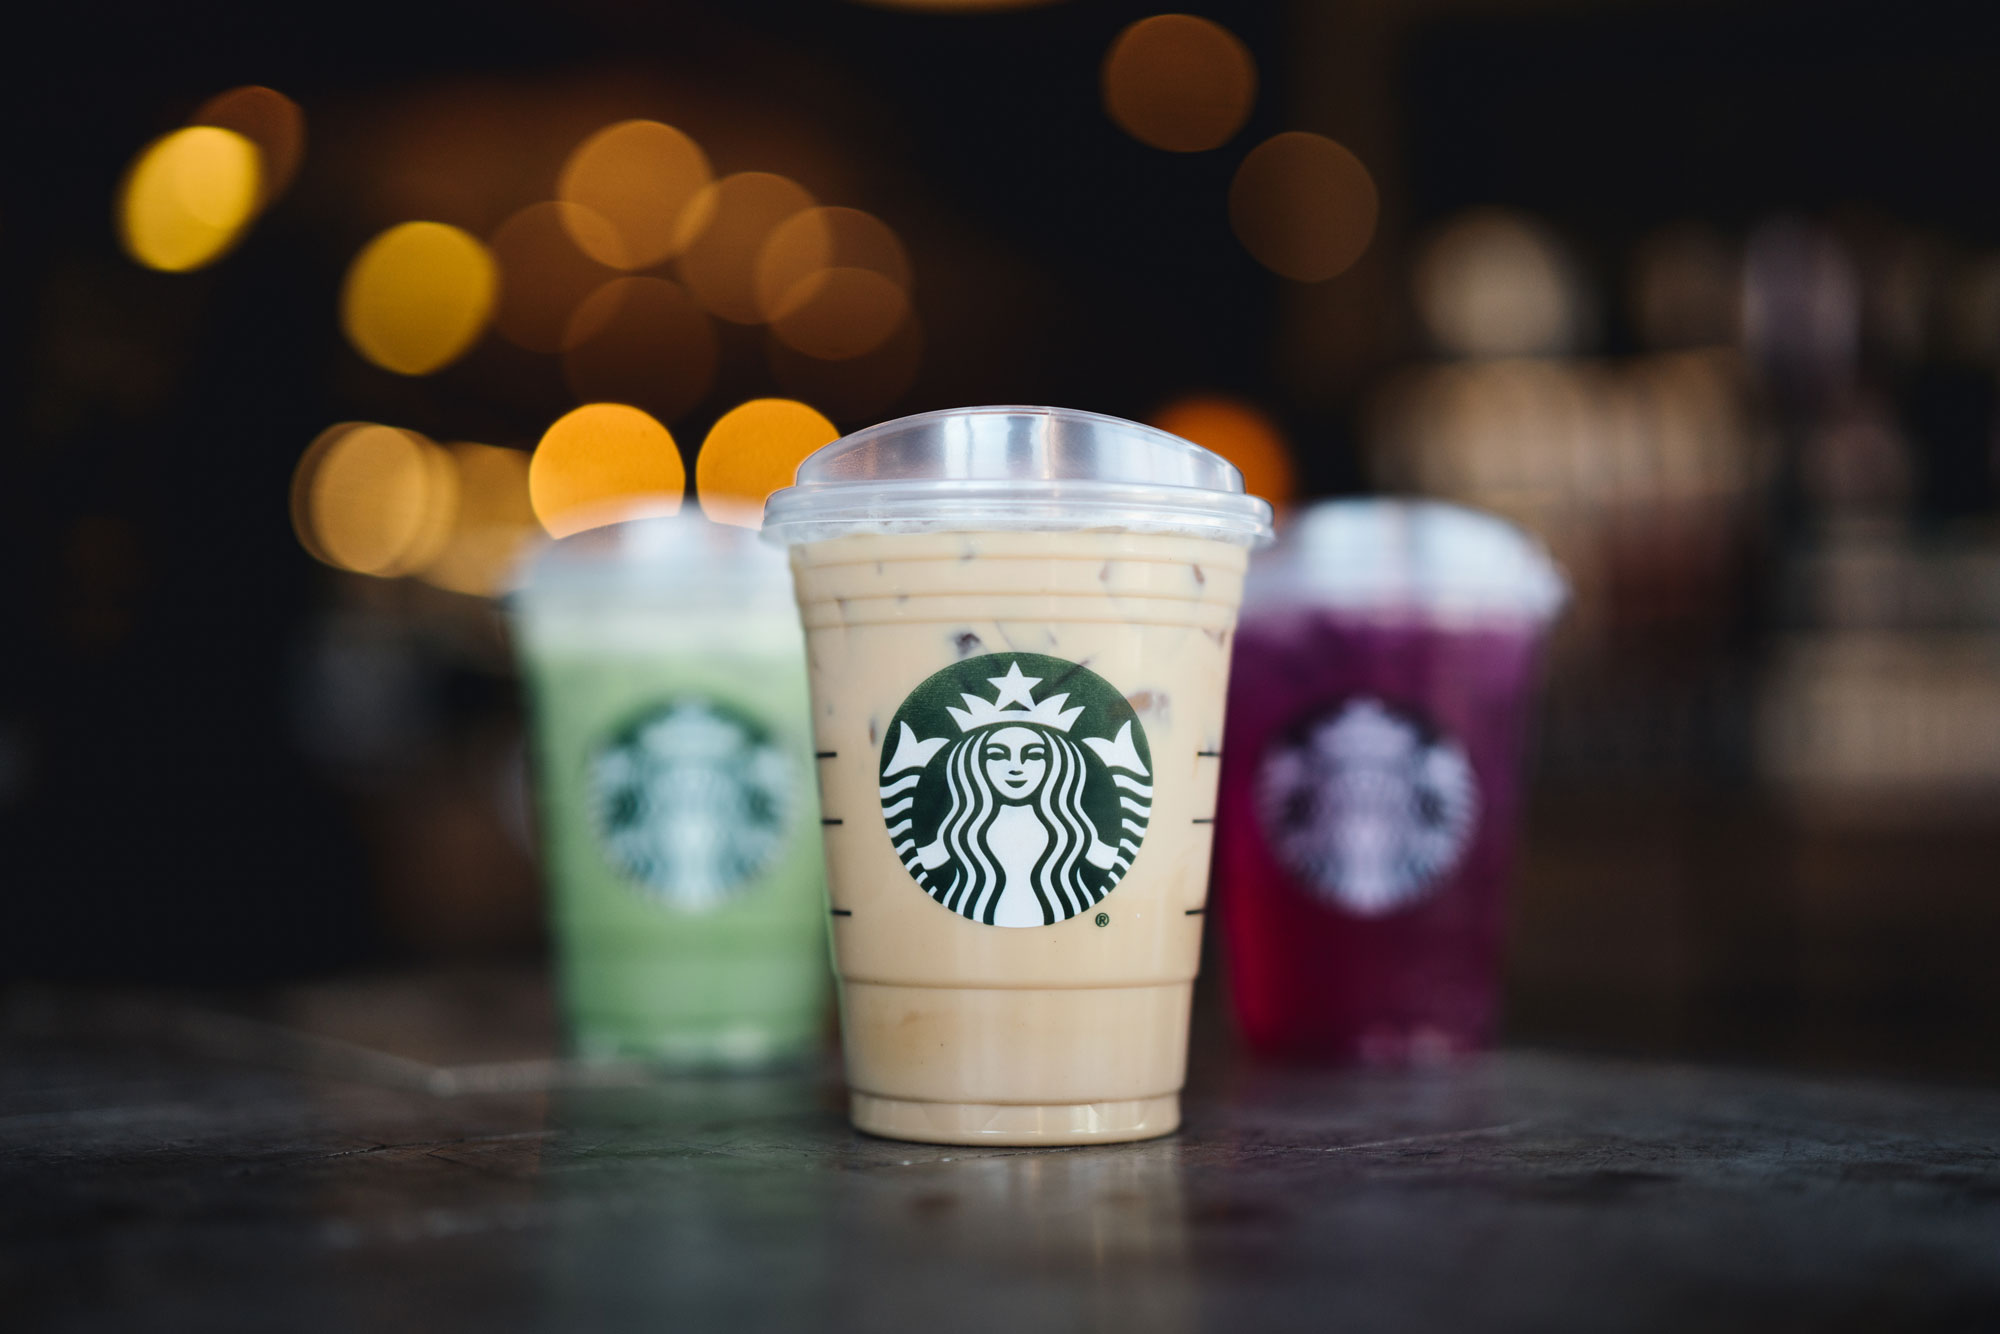 Starbucks Lifestyle Image with Three Cold Drinks